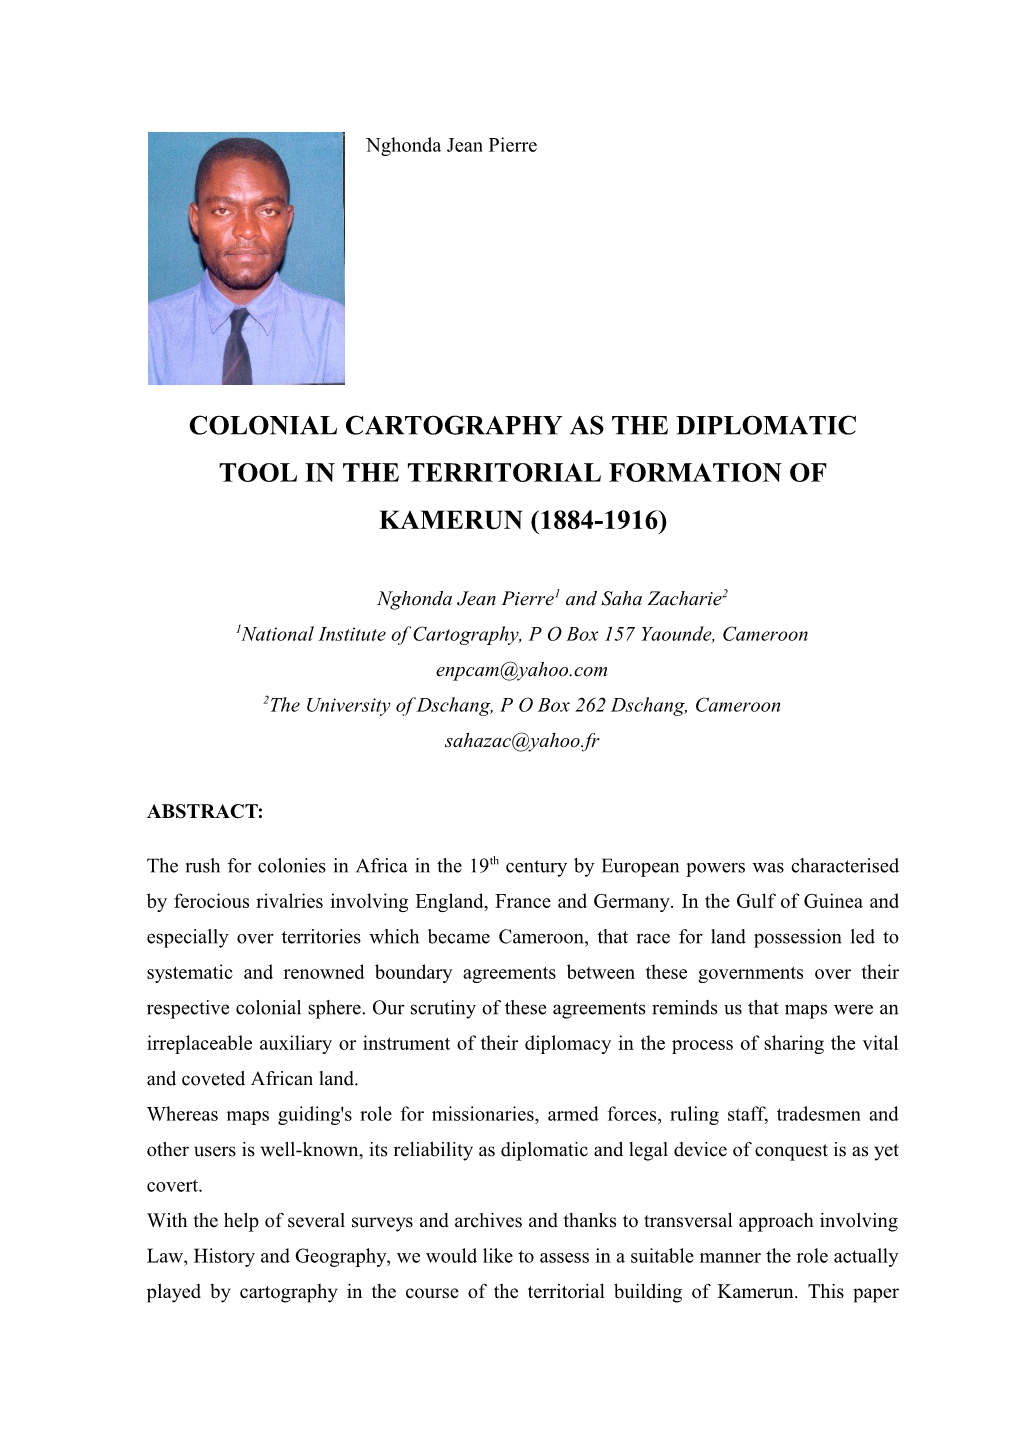 Colonial Cartography As the Diplomatic Tool in the Territorial Formation of Kamerun (1884-1916)